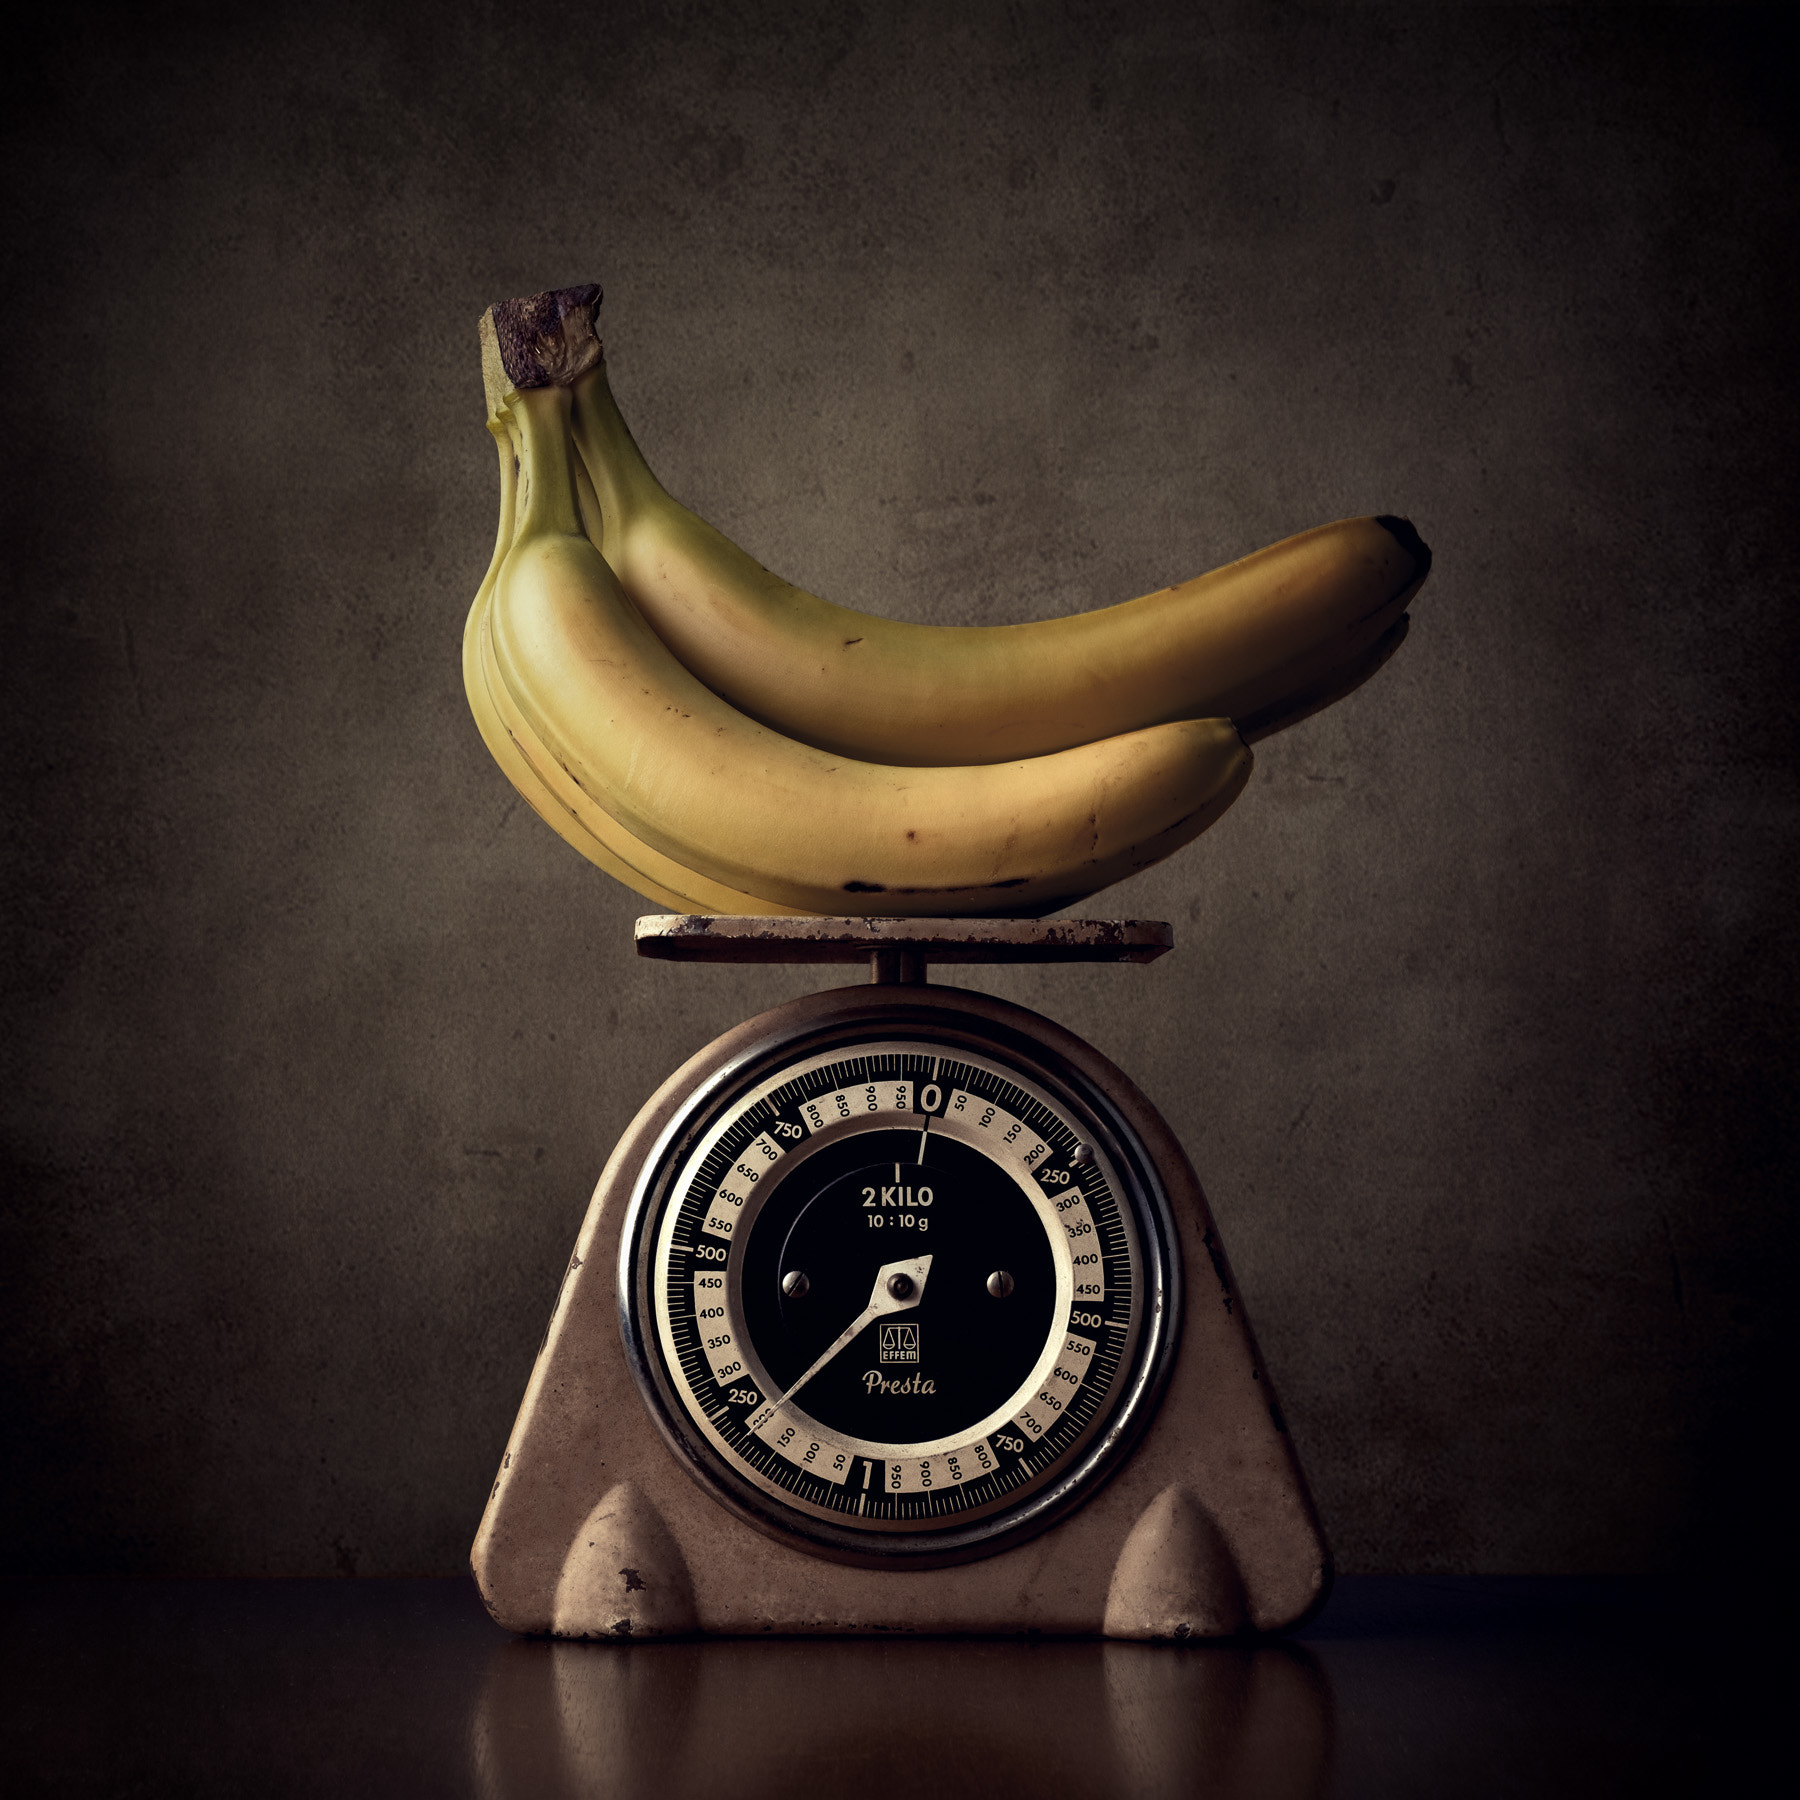 General 1800x1800 Michael Schnabl still life food fruit bananas scale Bunch of Bananas reflection weightscale